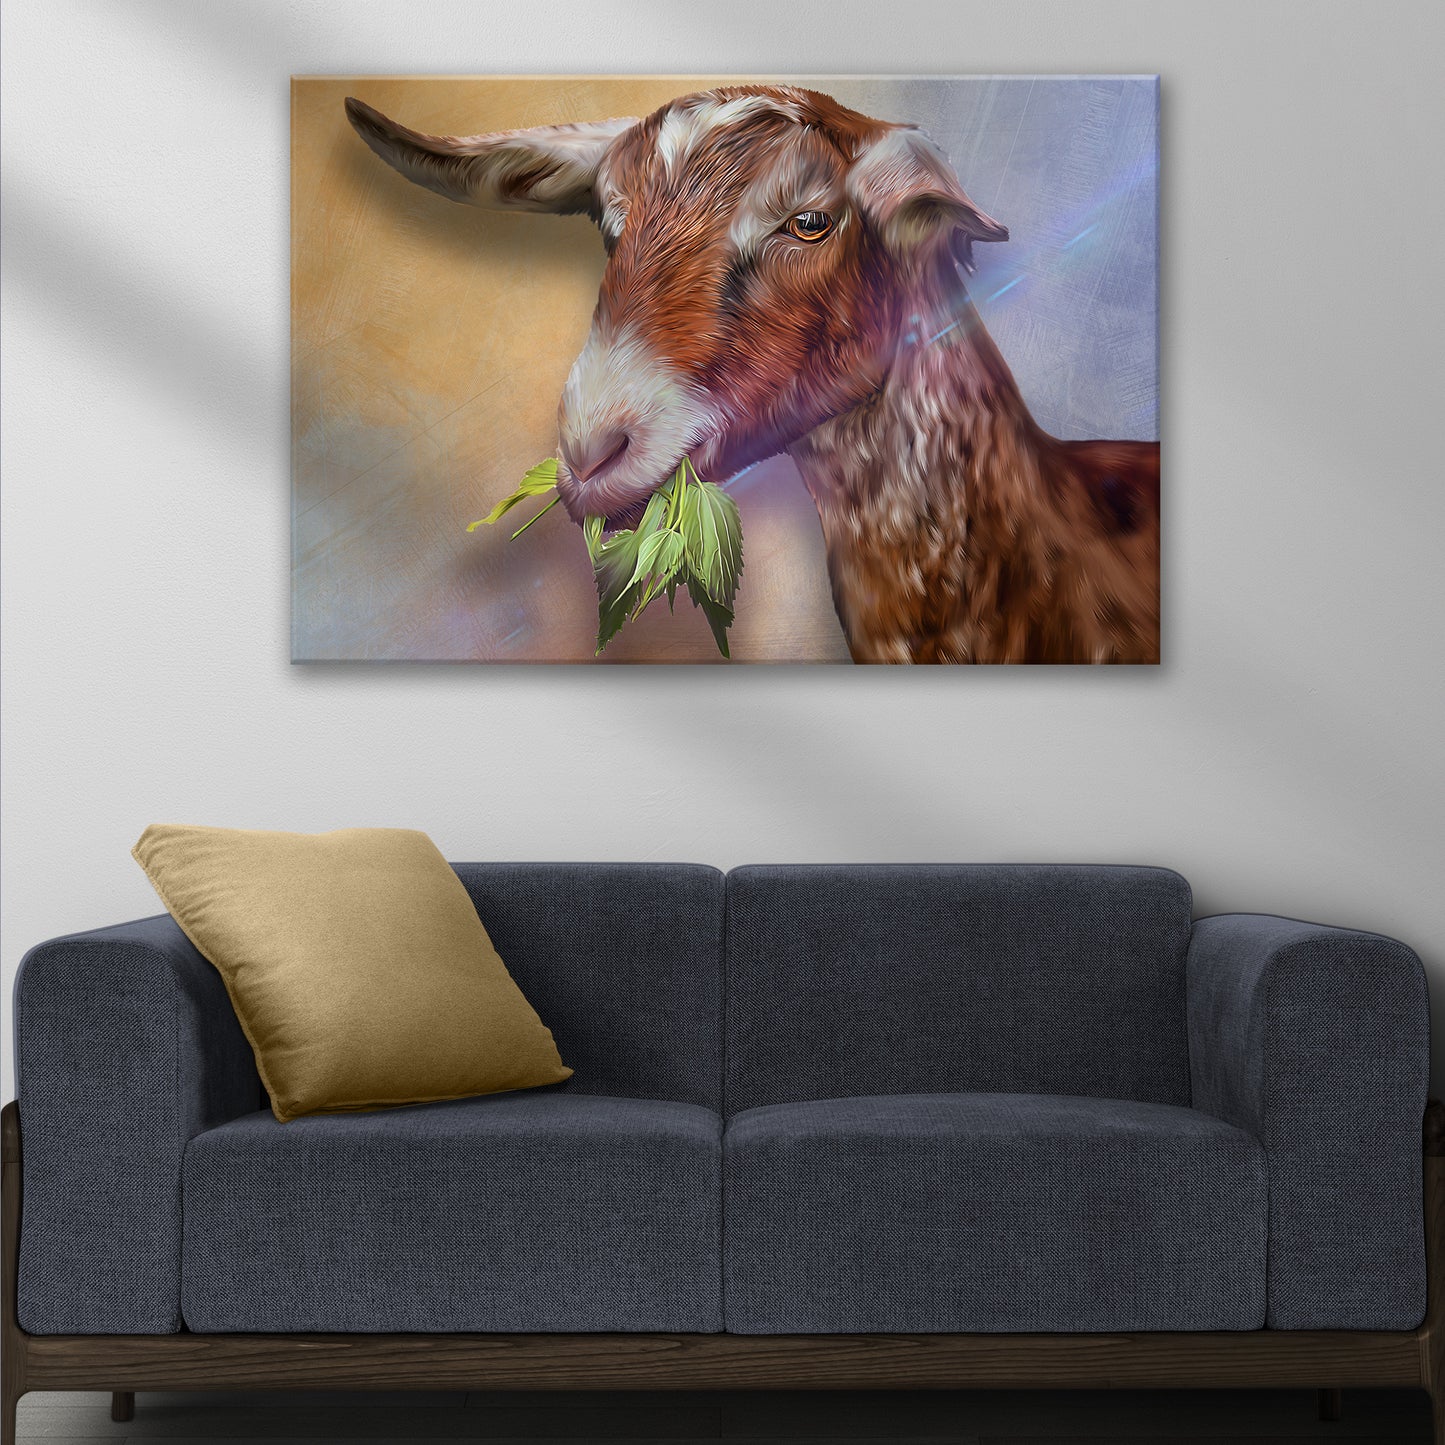 Munching Goat Portrait Canvas Wall Art Style 2 - Image by Tailored Canvases